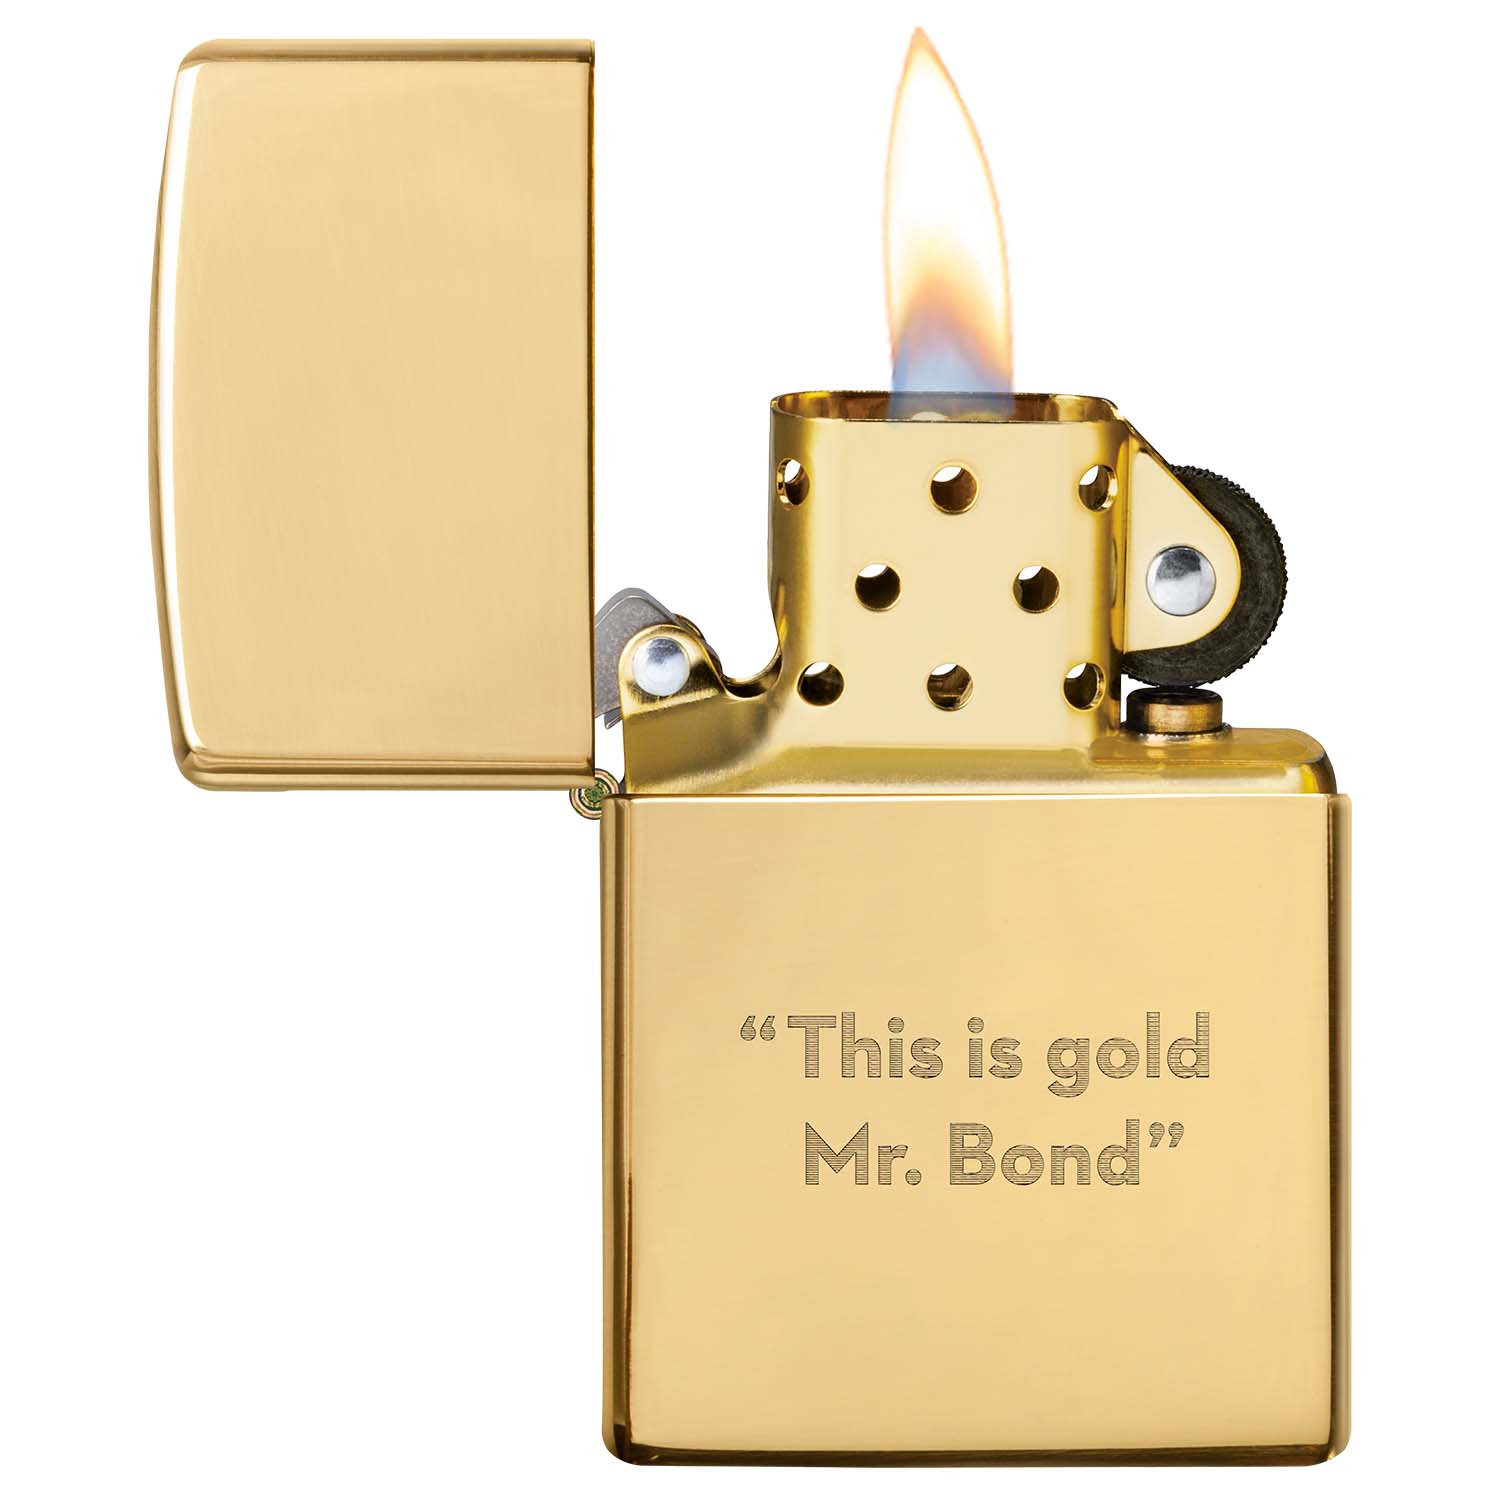 James Solid Lighter Limited Edition | 007Store